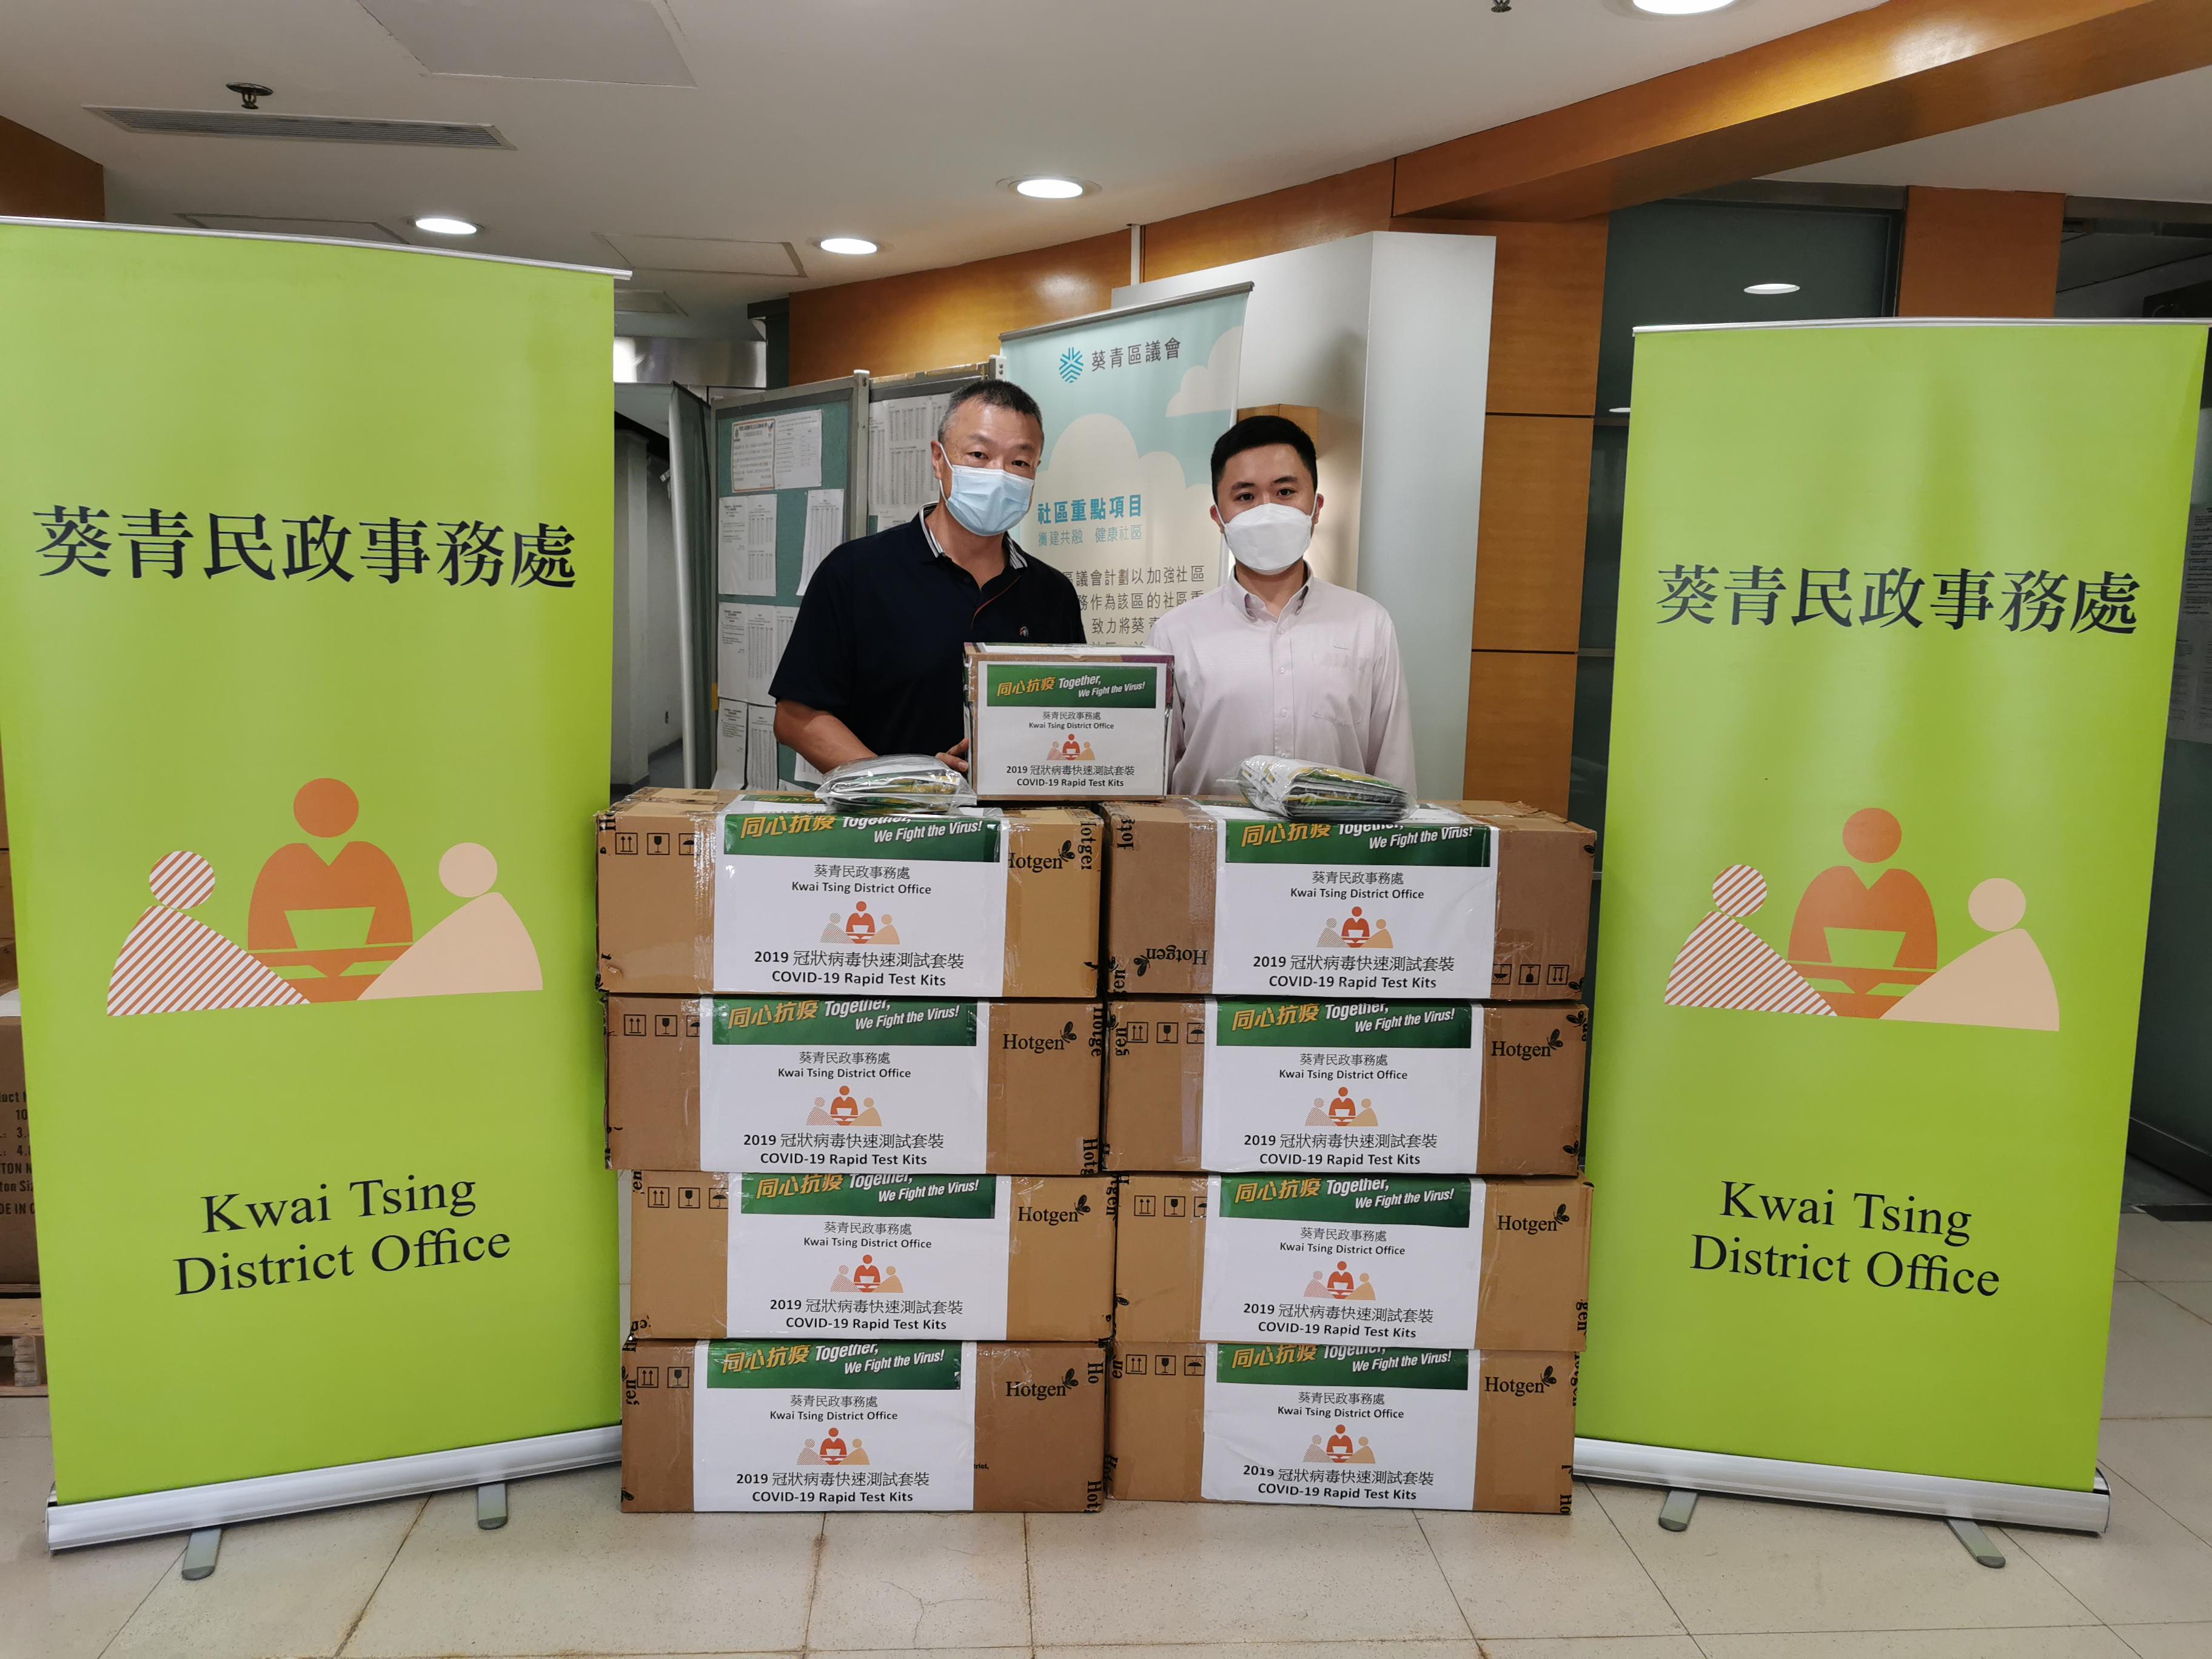 The Kwai Tsing District Office today (June 23) distributed COVID-19 rapid test kits to households, cleansing workers and property management staff living and working in Highland Park for voluntary testing through the property management company.